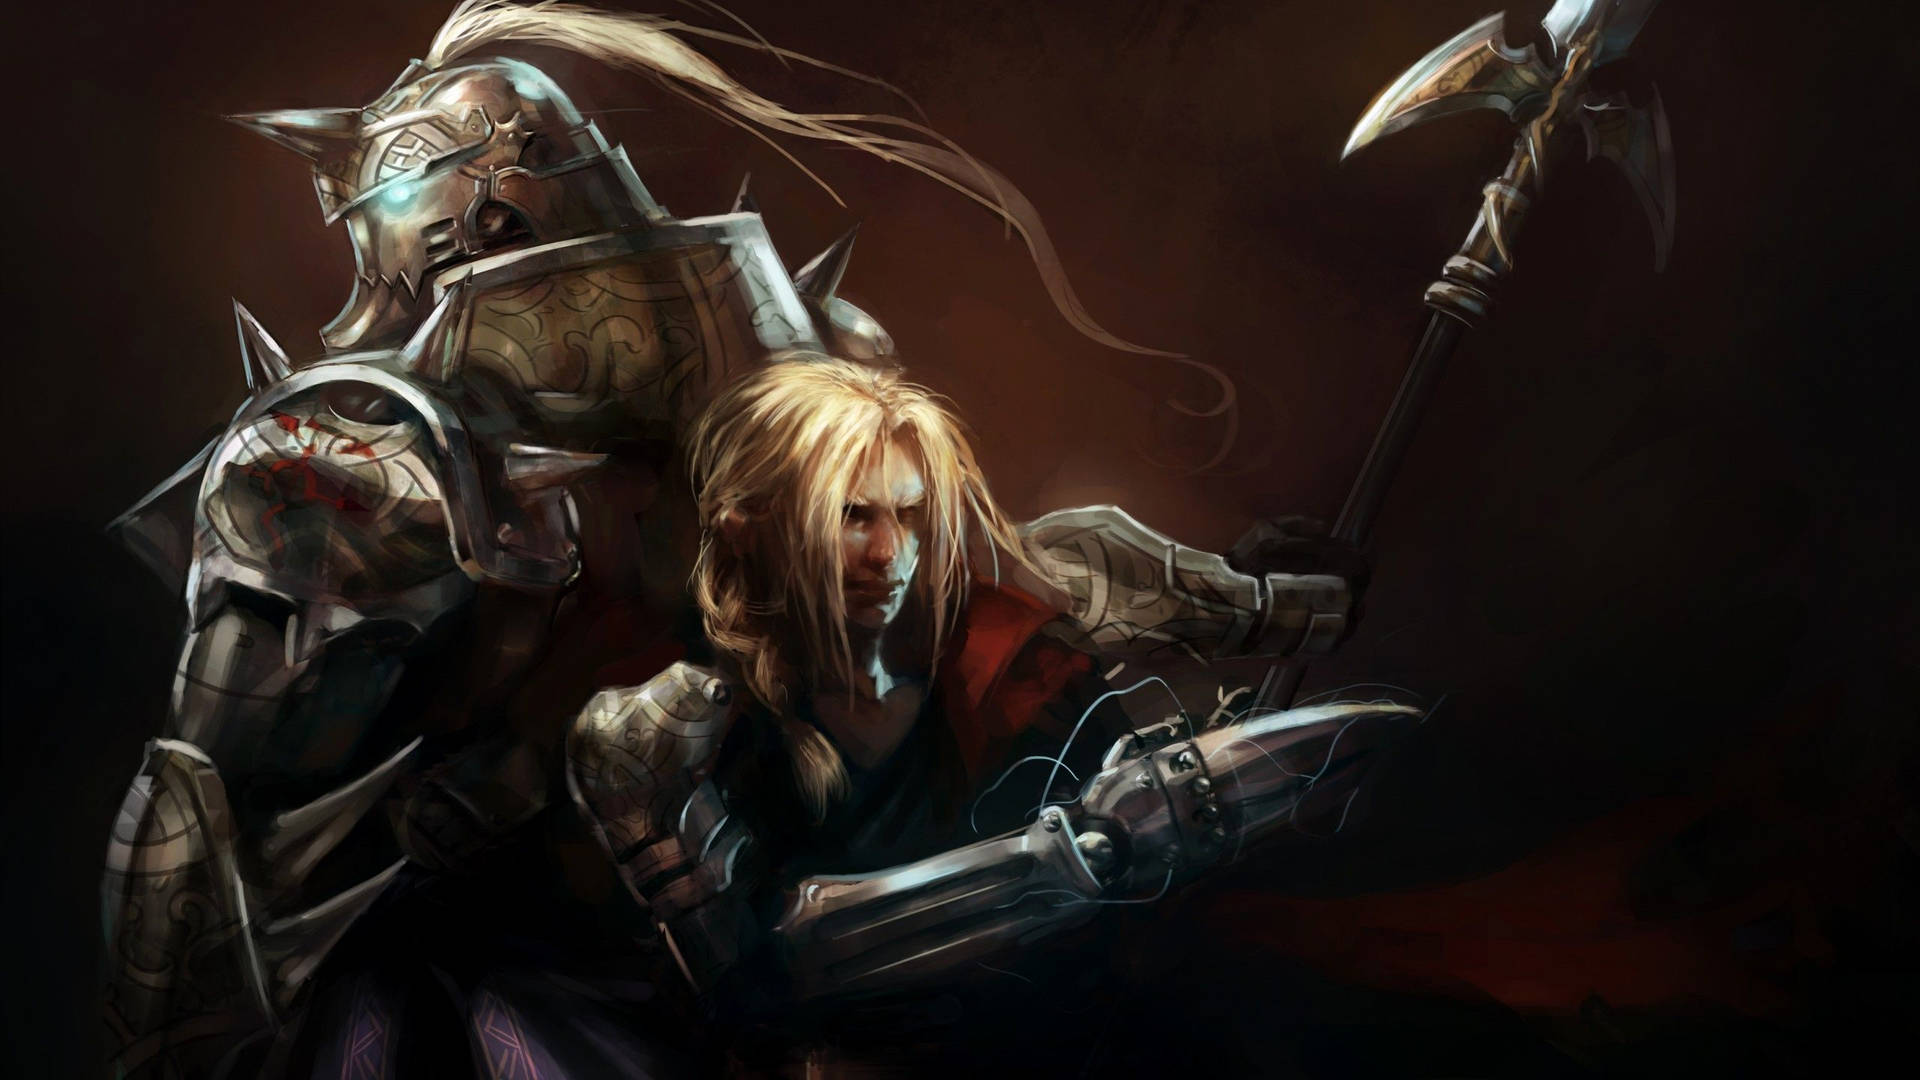 The Elric Brothers from Fullmetal Alchemist embark on an adventure Wallpaper